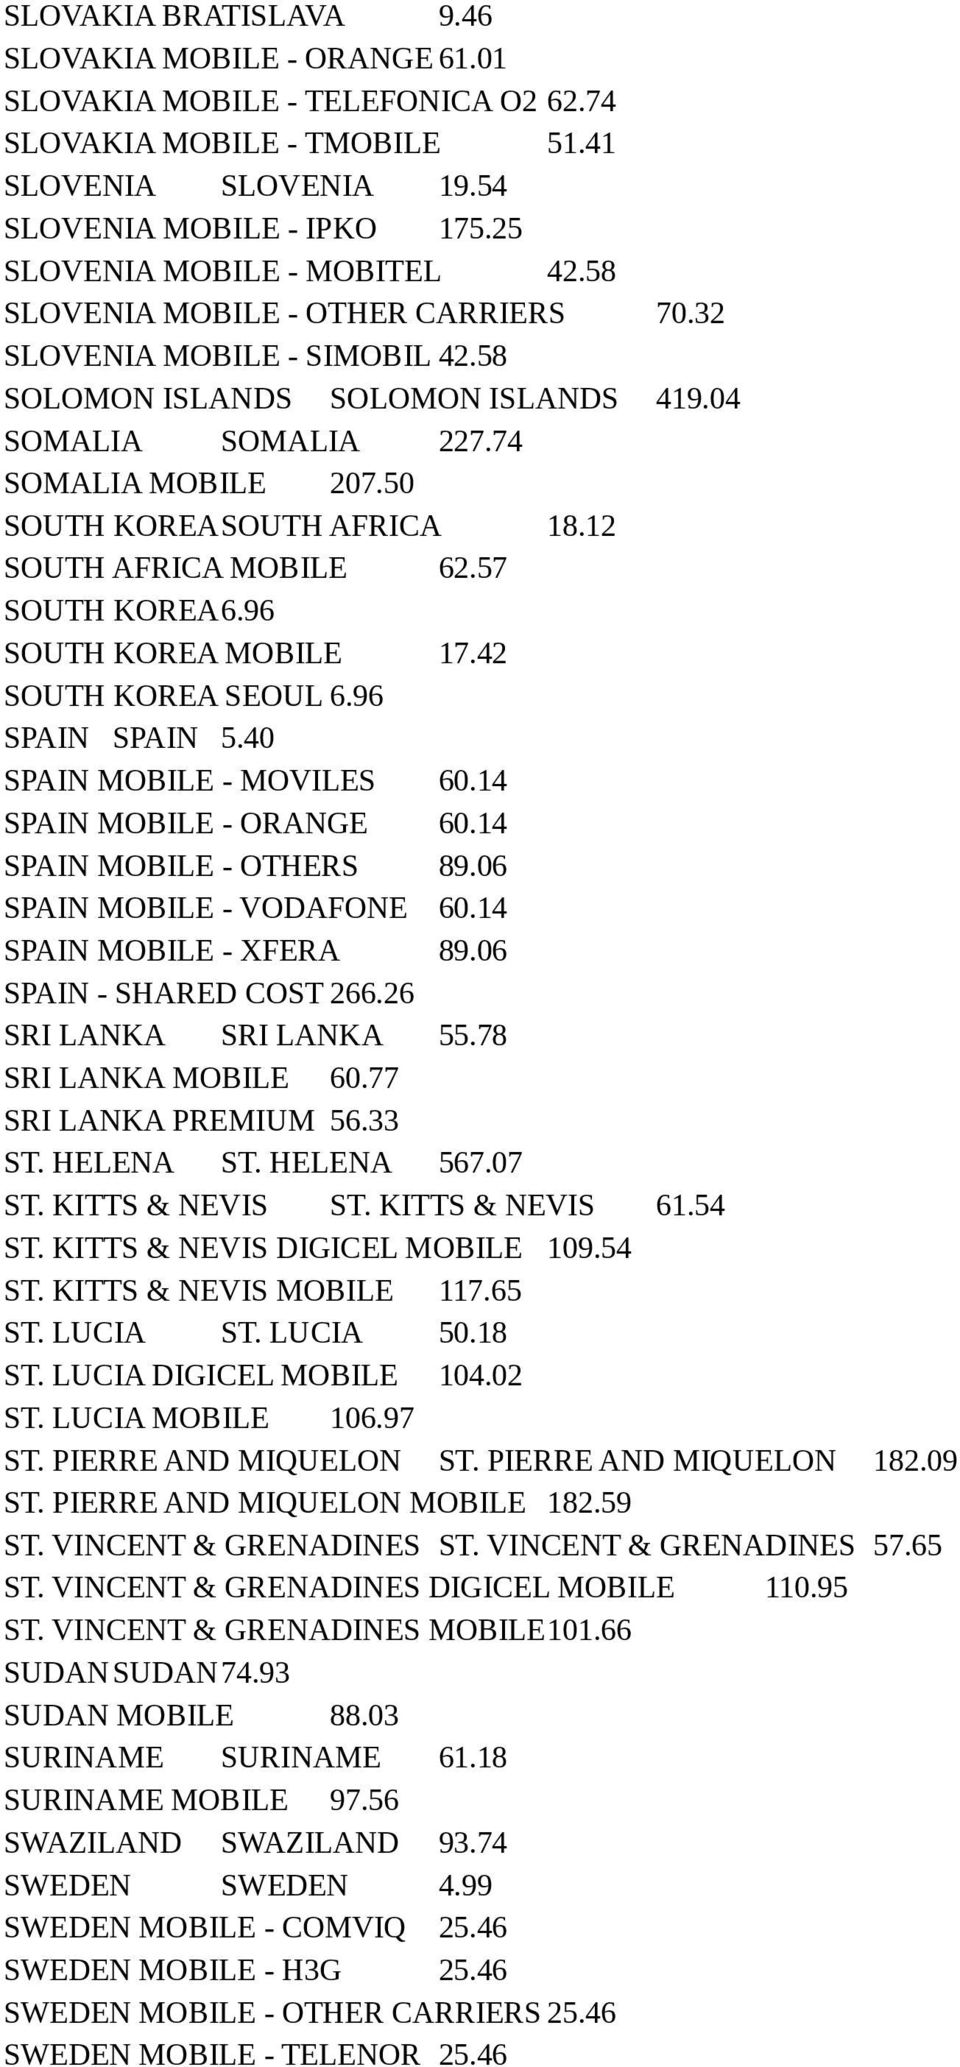 50 SOUTH KOREASOUTH AFRICA 18.12 SOUTH AFRICA MOBILE 62.57 SOUTH KOREA6.96 SOUTH KOREA MOBILE 17.42 SOUTH KOREA SEOUL 6.96 SPAIN SPAIN 5.40 SPAIN MOBILE - MOVILES 60.14 SPAIN MOBILE - ORANGE 60.